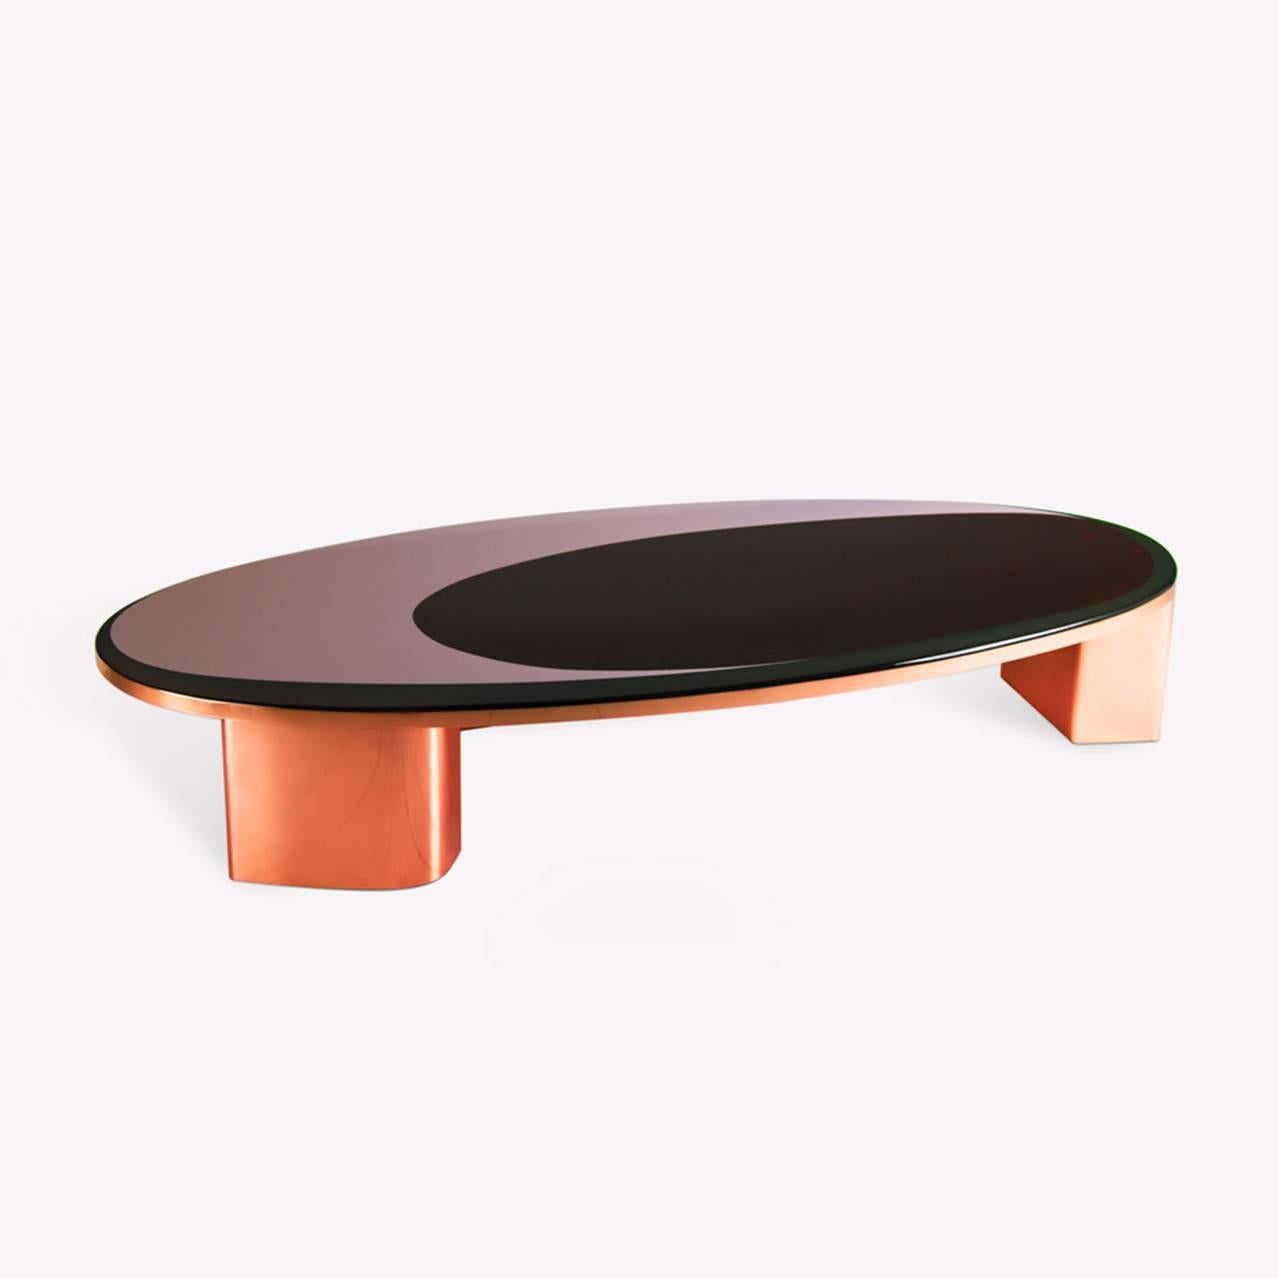 A perfect cocktail table to put you in the space oddity mood. The surface finish is made in resin and designed with a smaller over ring inside the larger oval design. The inner ring highlights sparkles in deep crimson tones which play well as a